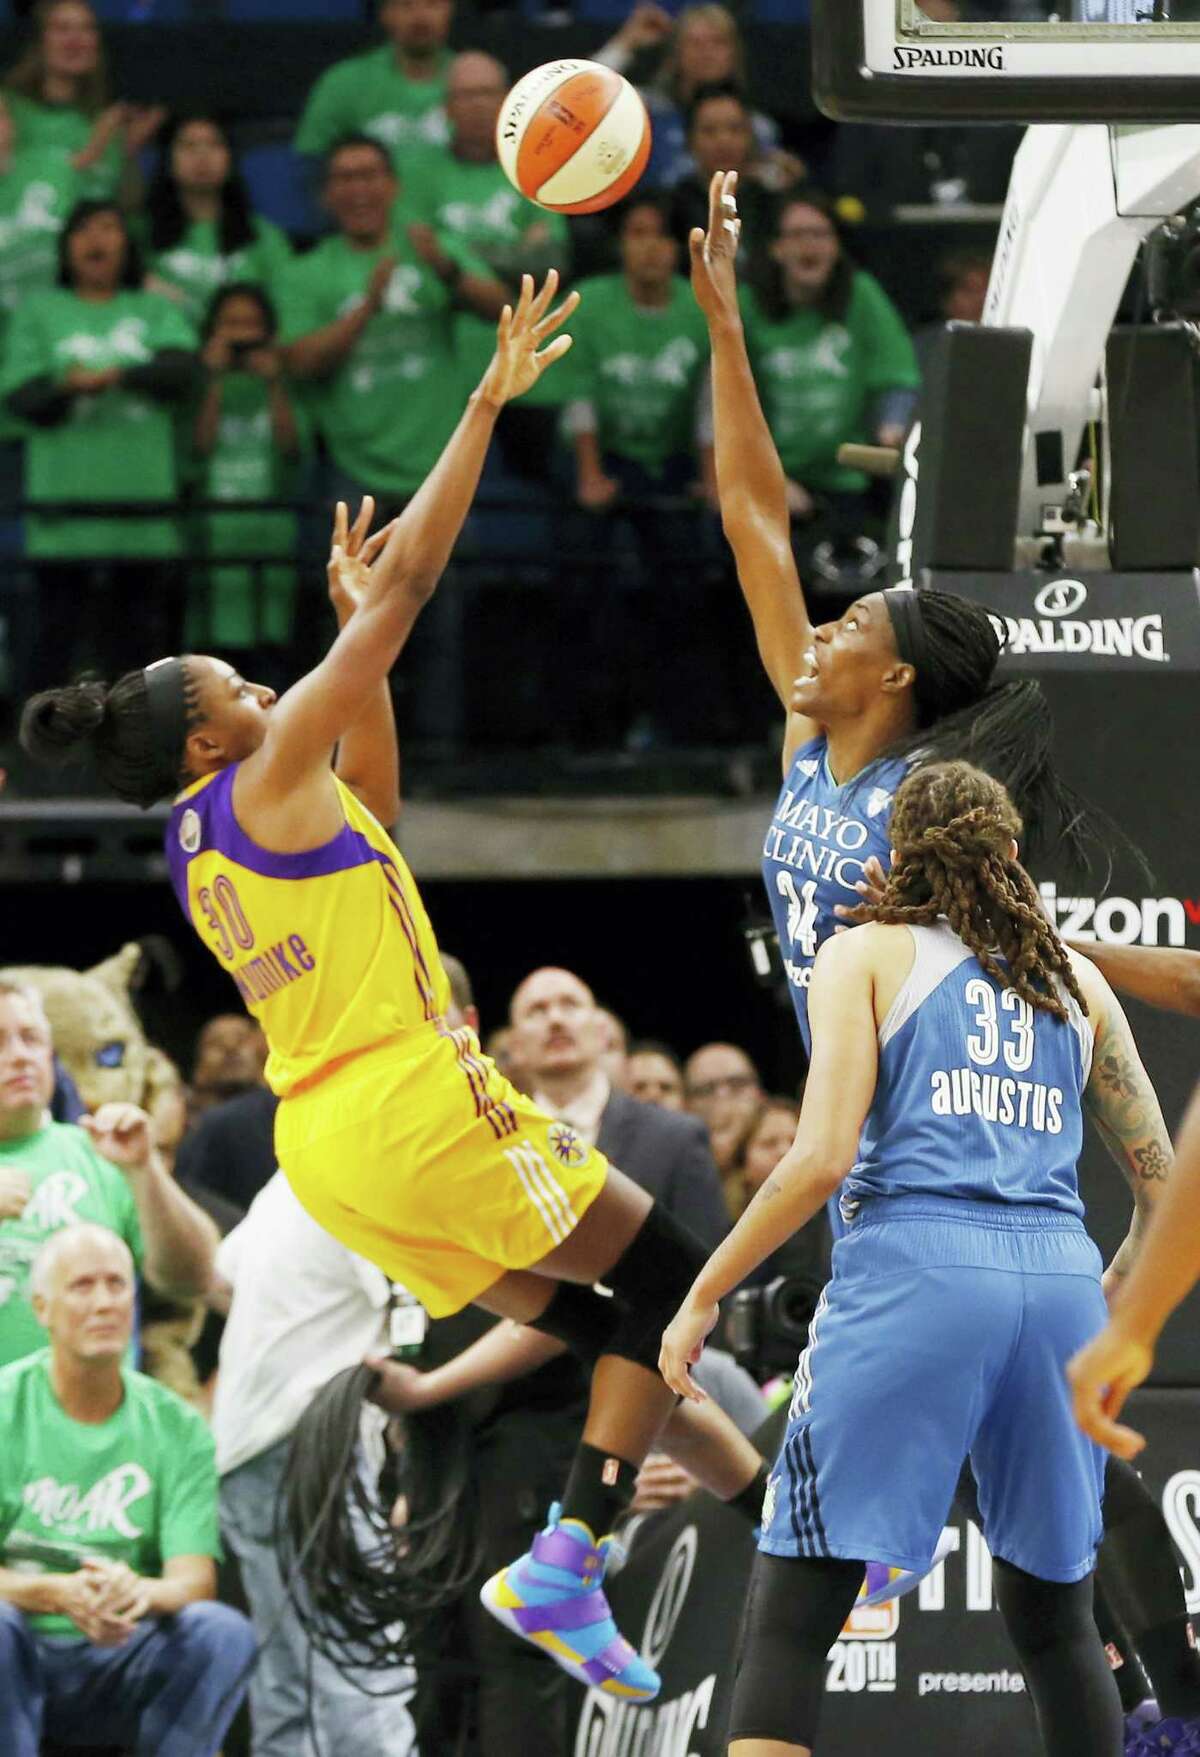 Los Angeles Sparks’ Nneka Ogwumike, left, shoots the game wining shot with about 4 seconds left over Minnesota Lynx defender Sylvia Fowles on Thursday.